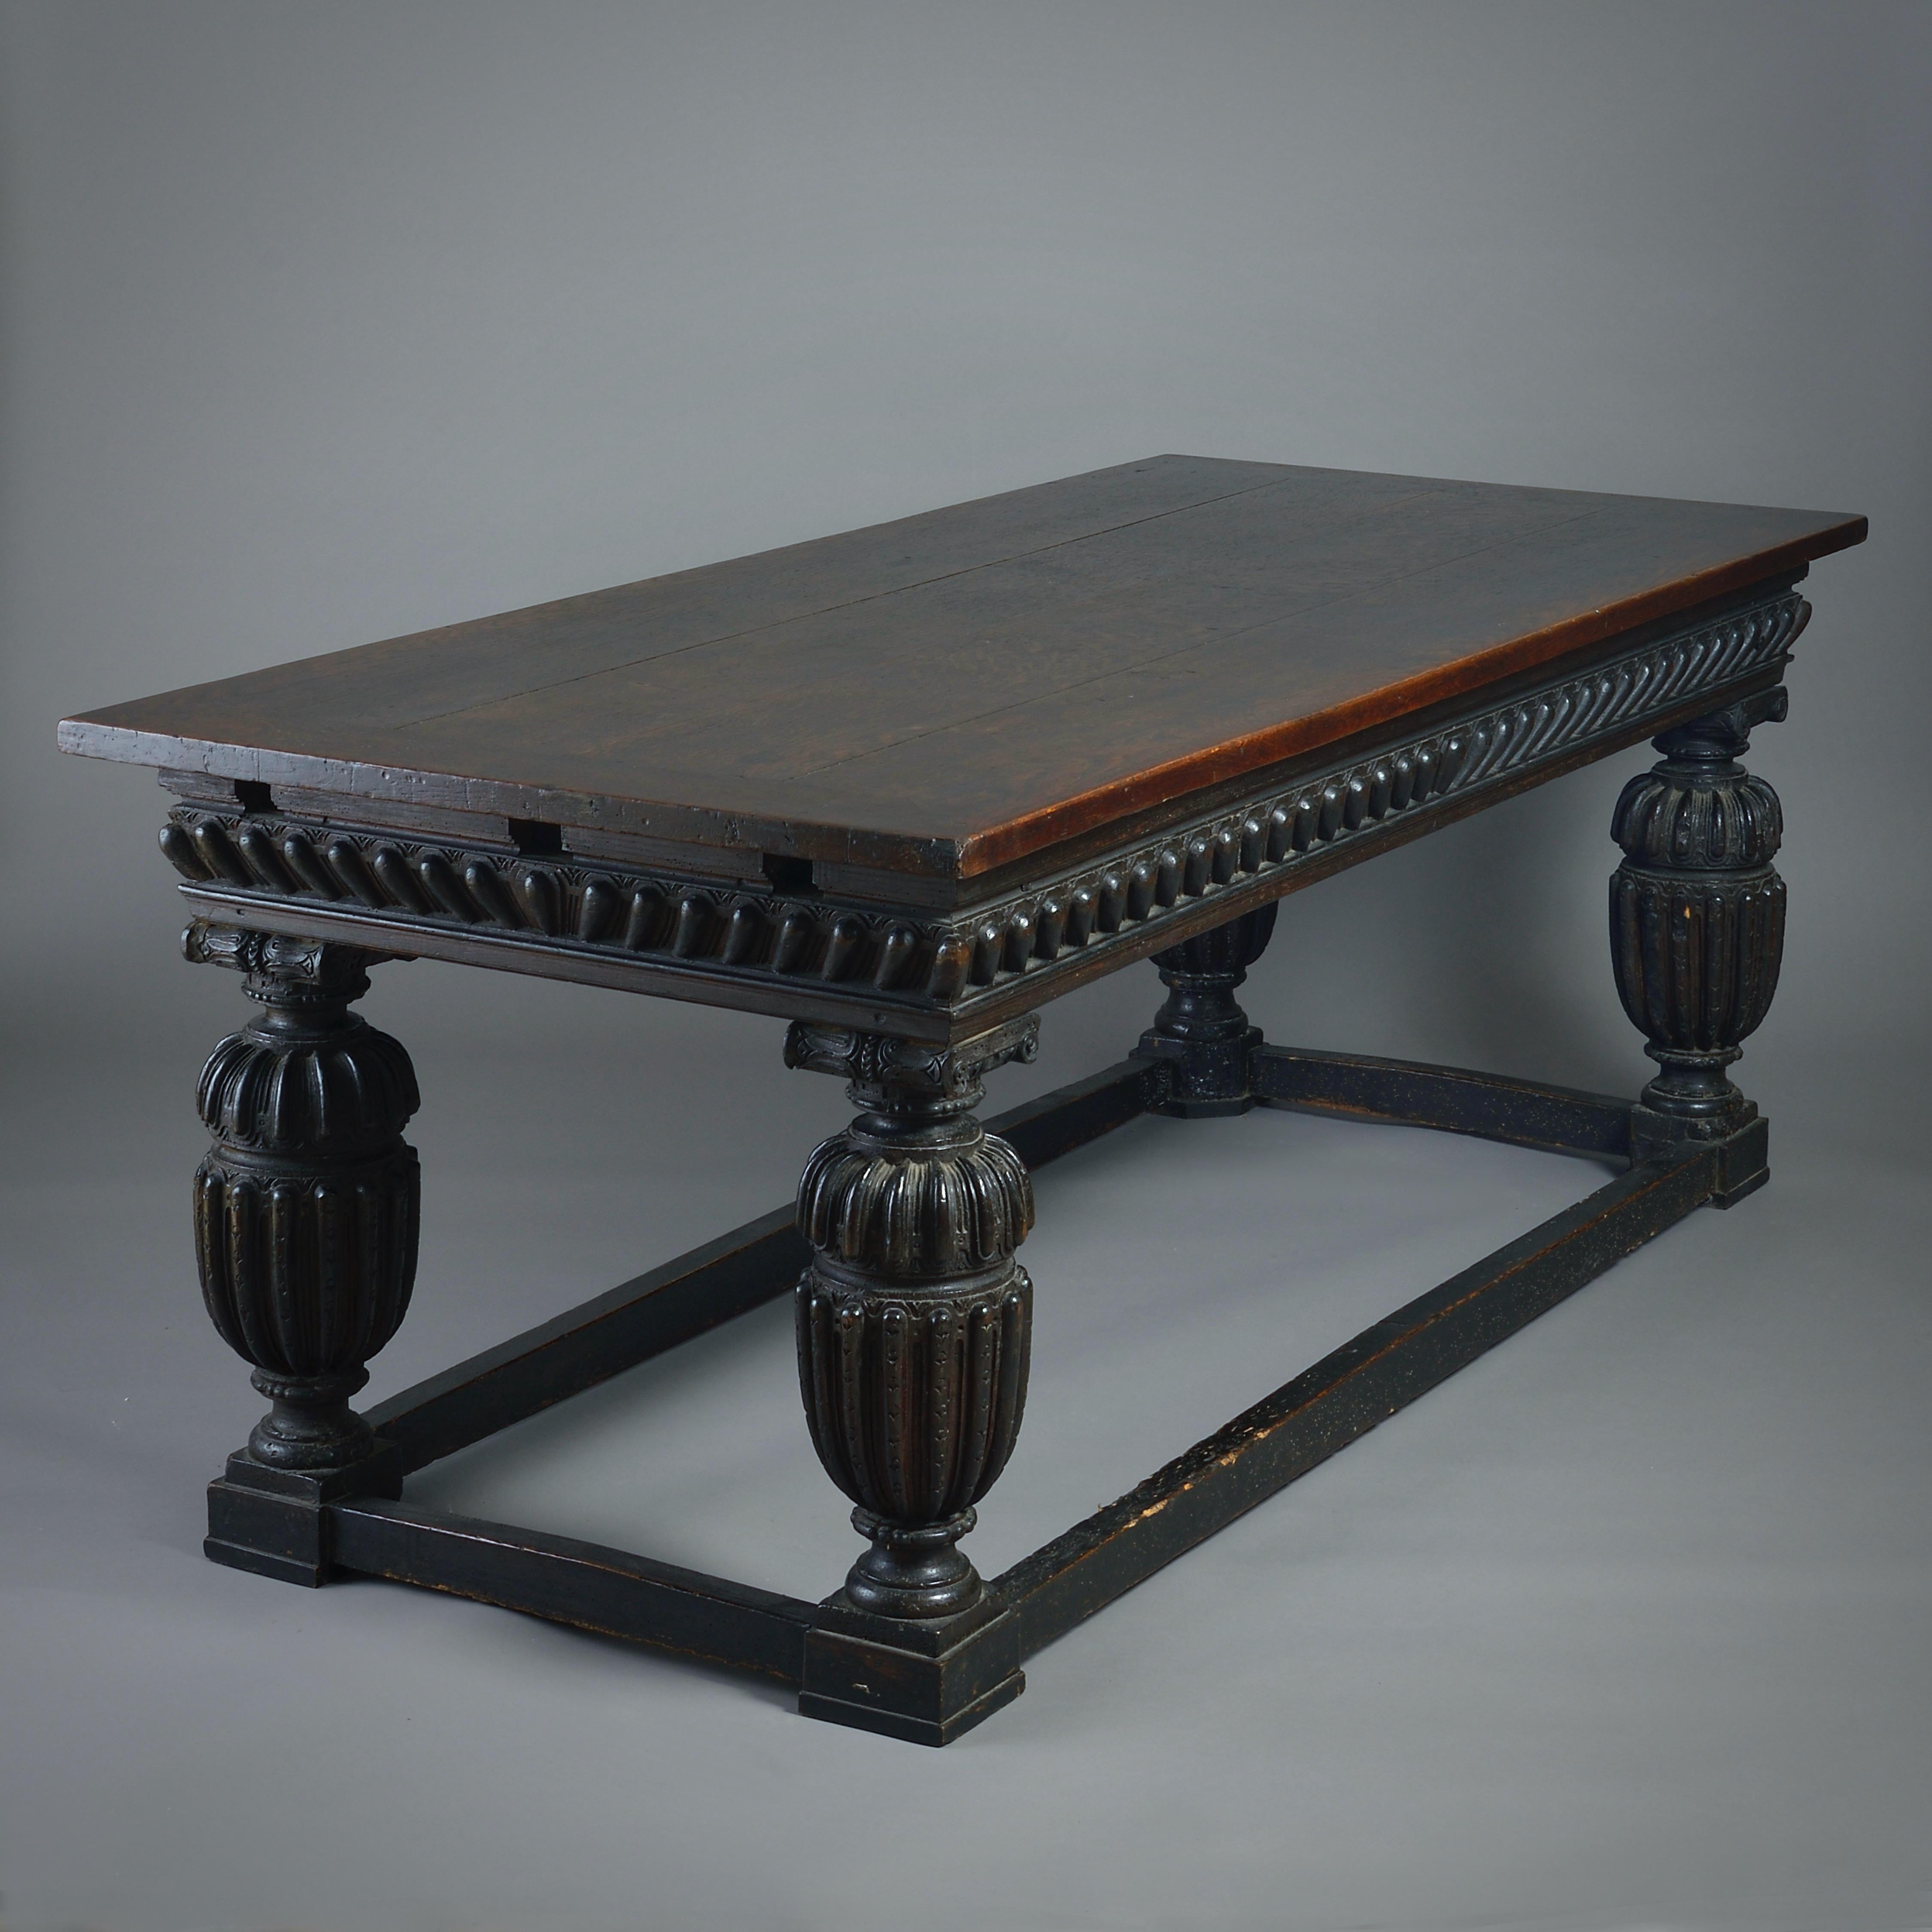 AN ELIZABETH I OAK TABLE, CIRCA 1580.

With gadrooned frieze and massive baluster legs with ionic capitals. Previously a draw-leaf able, lacking extending leaves. The stretchers 18th Century.

